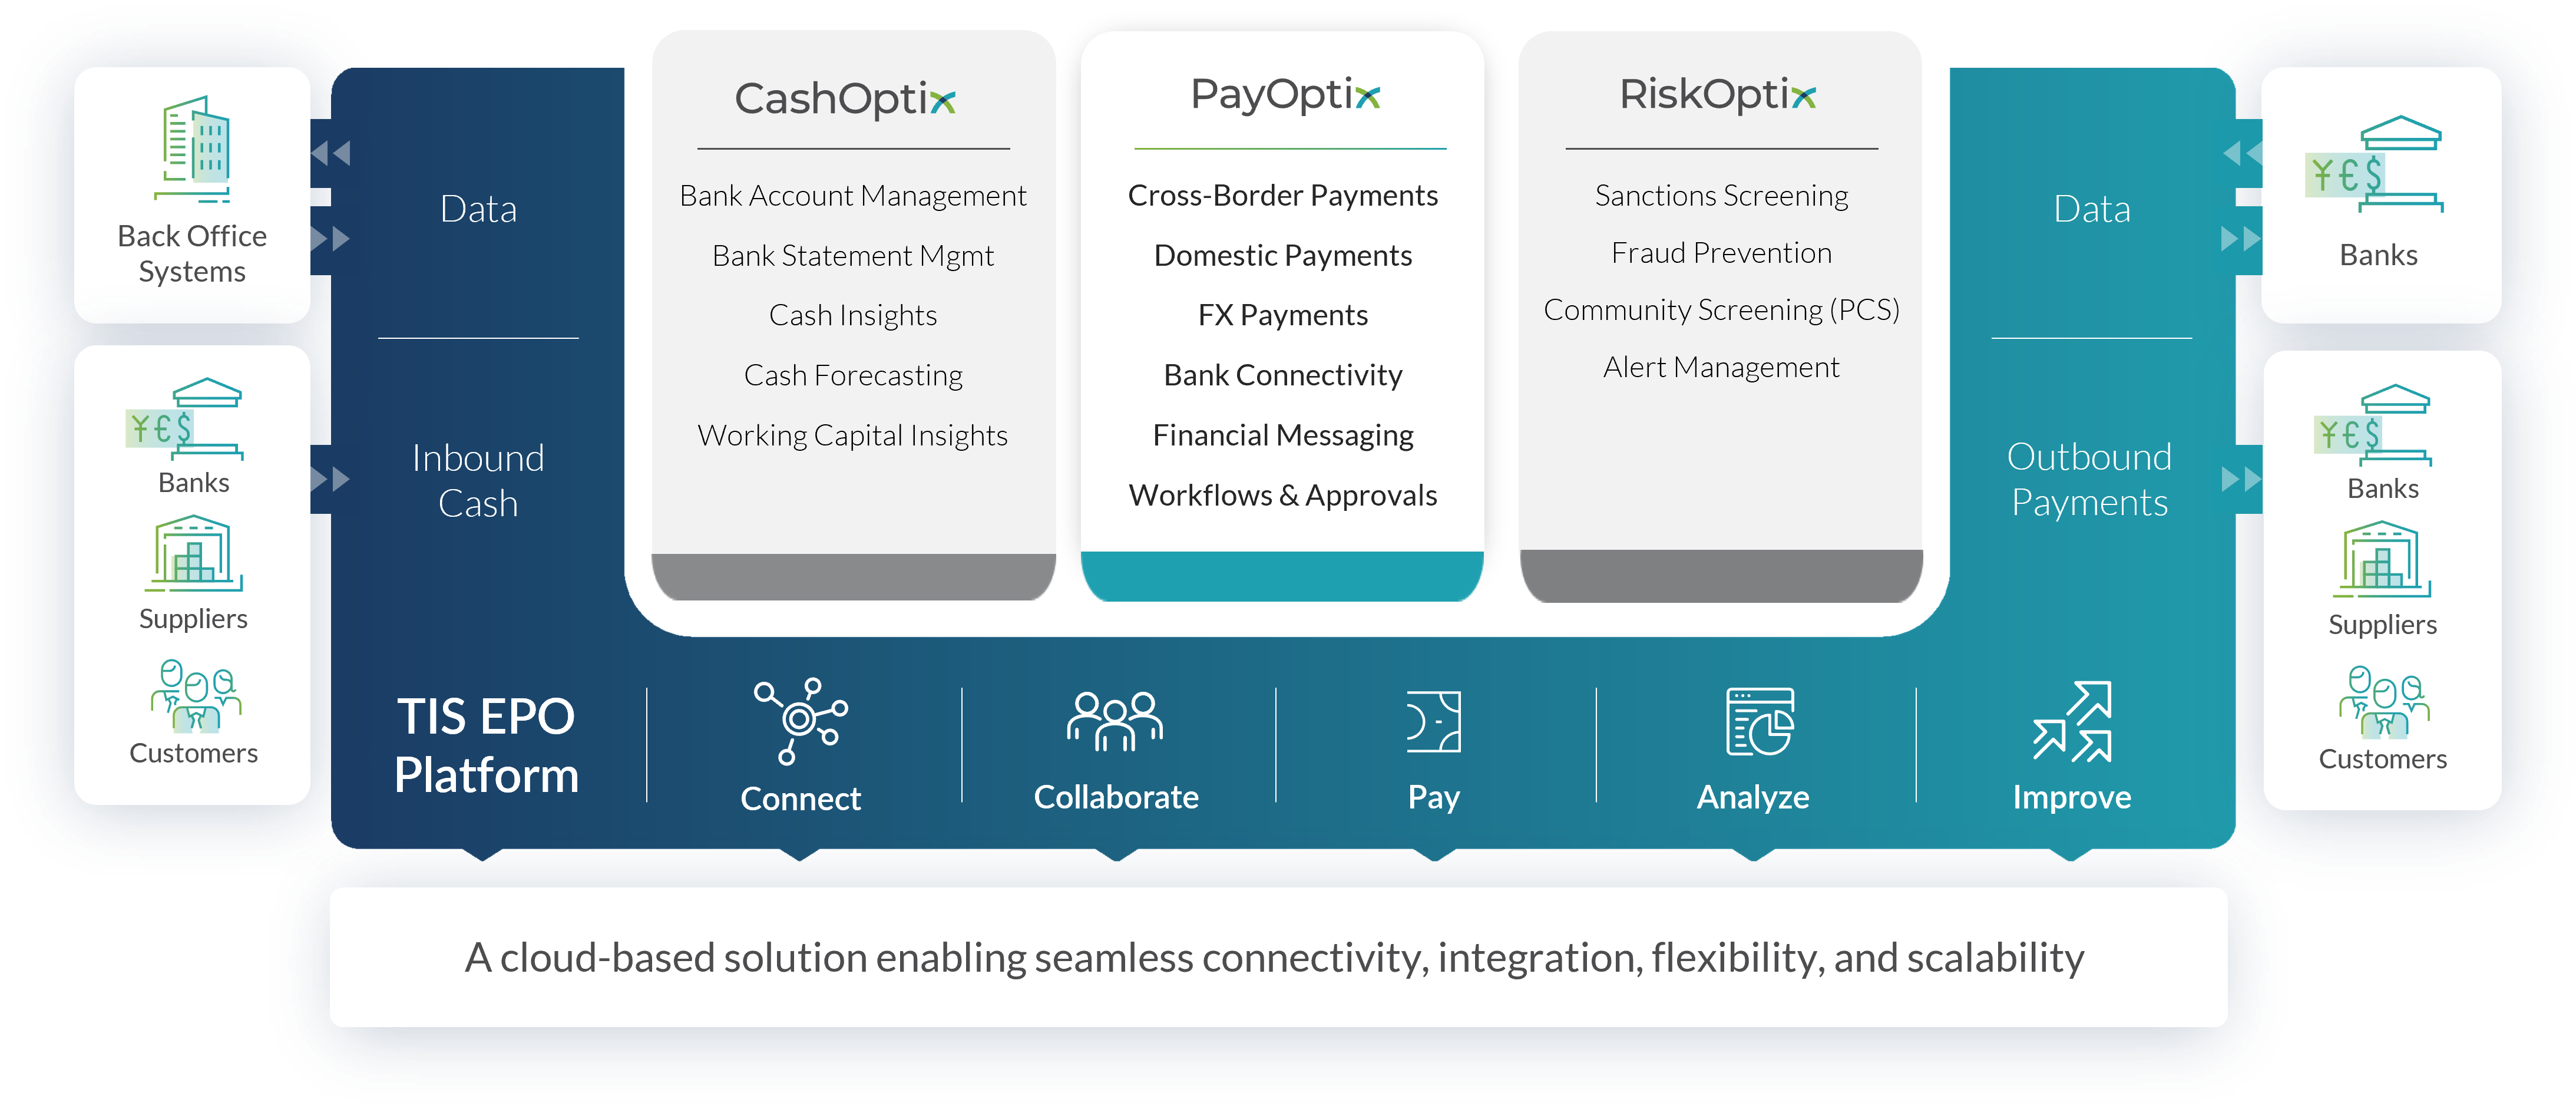 This image highlights the suite of payments, bank connectivity, financial messaging, and FX conversion management tools that TIS provides to clients.